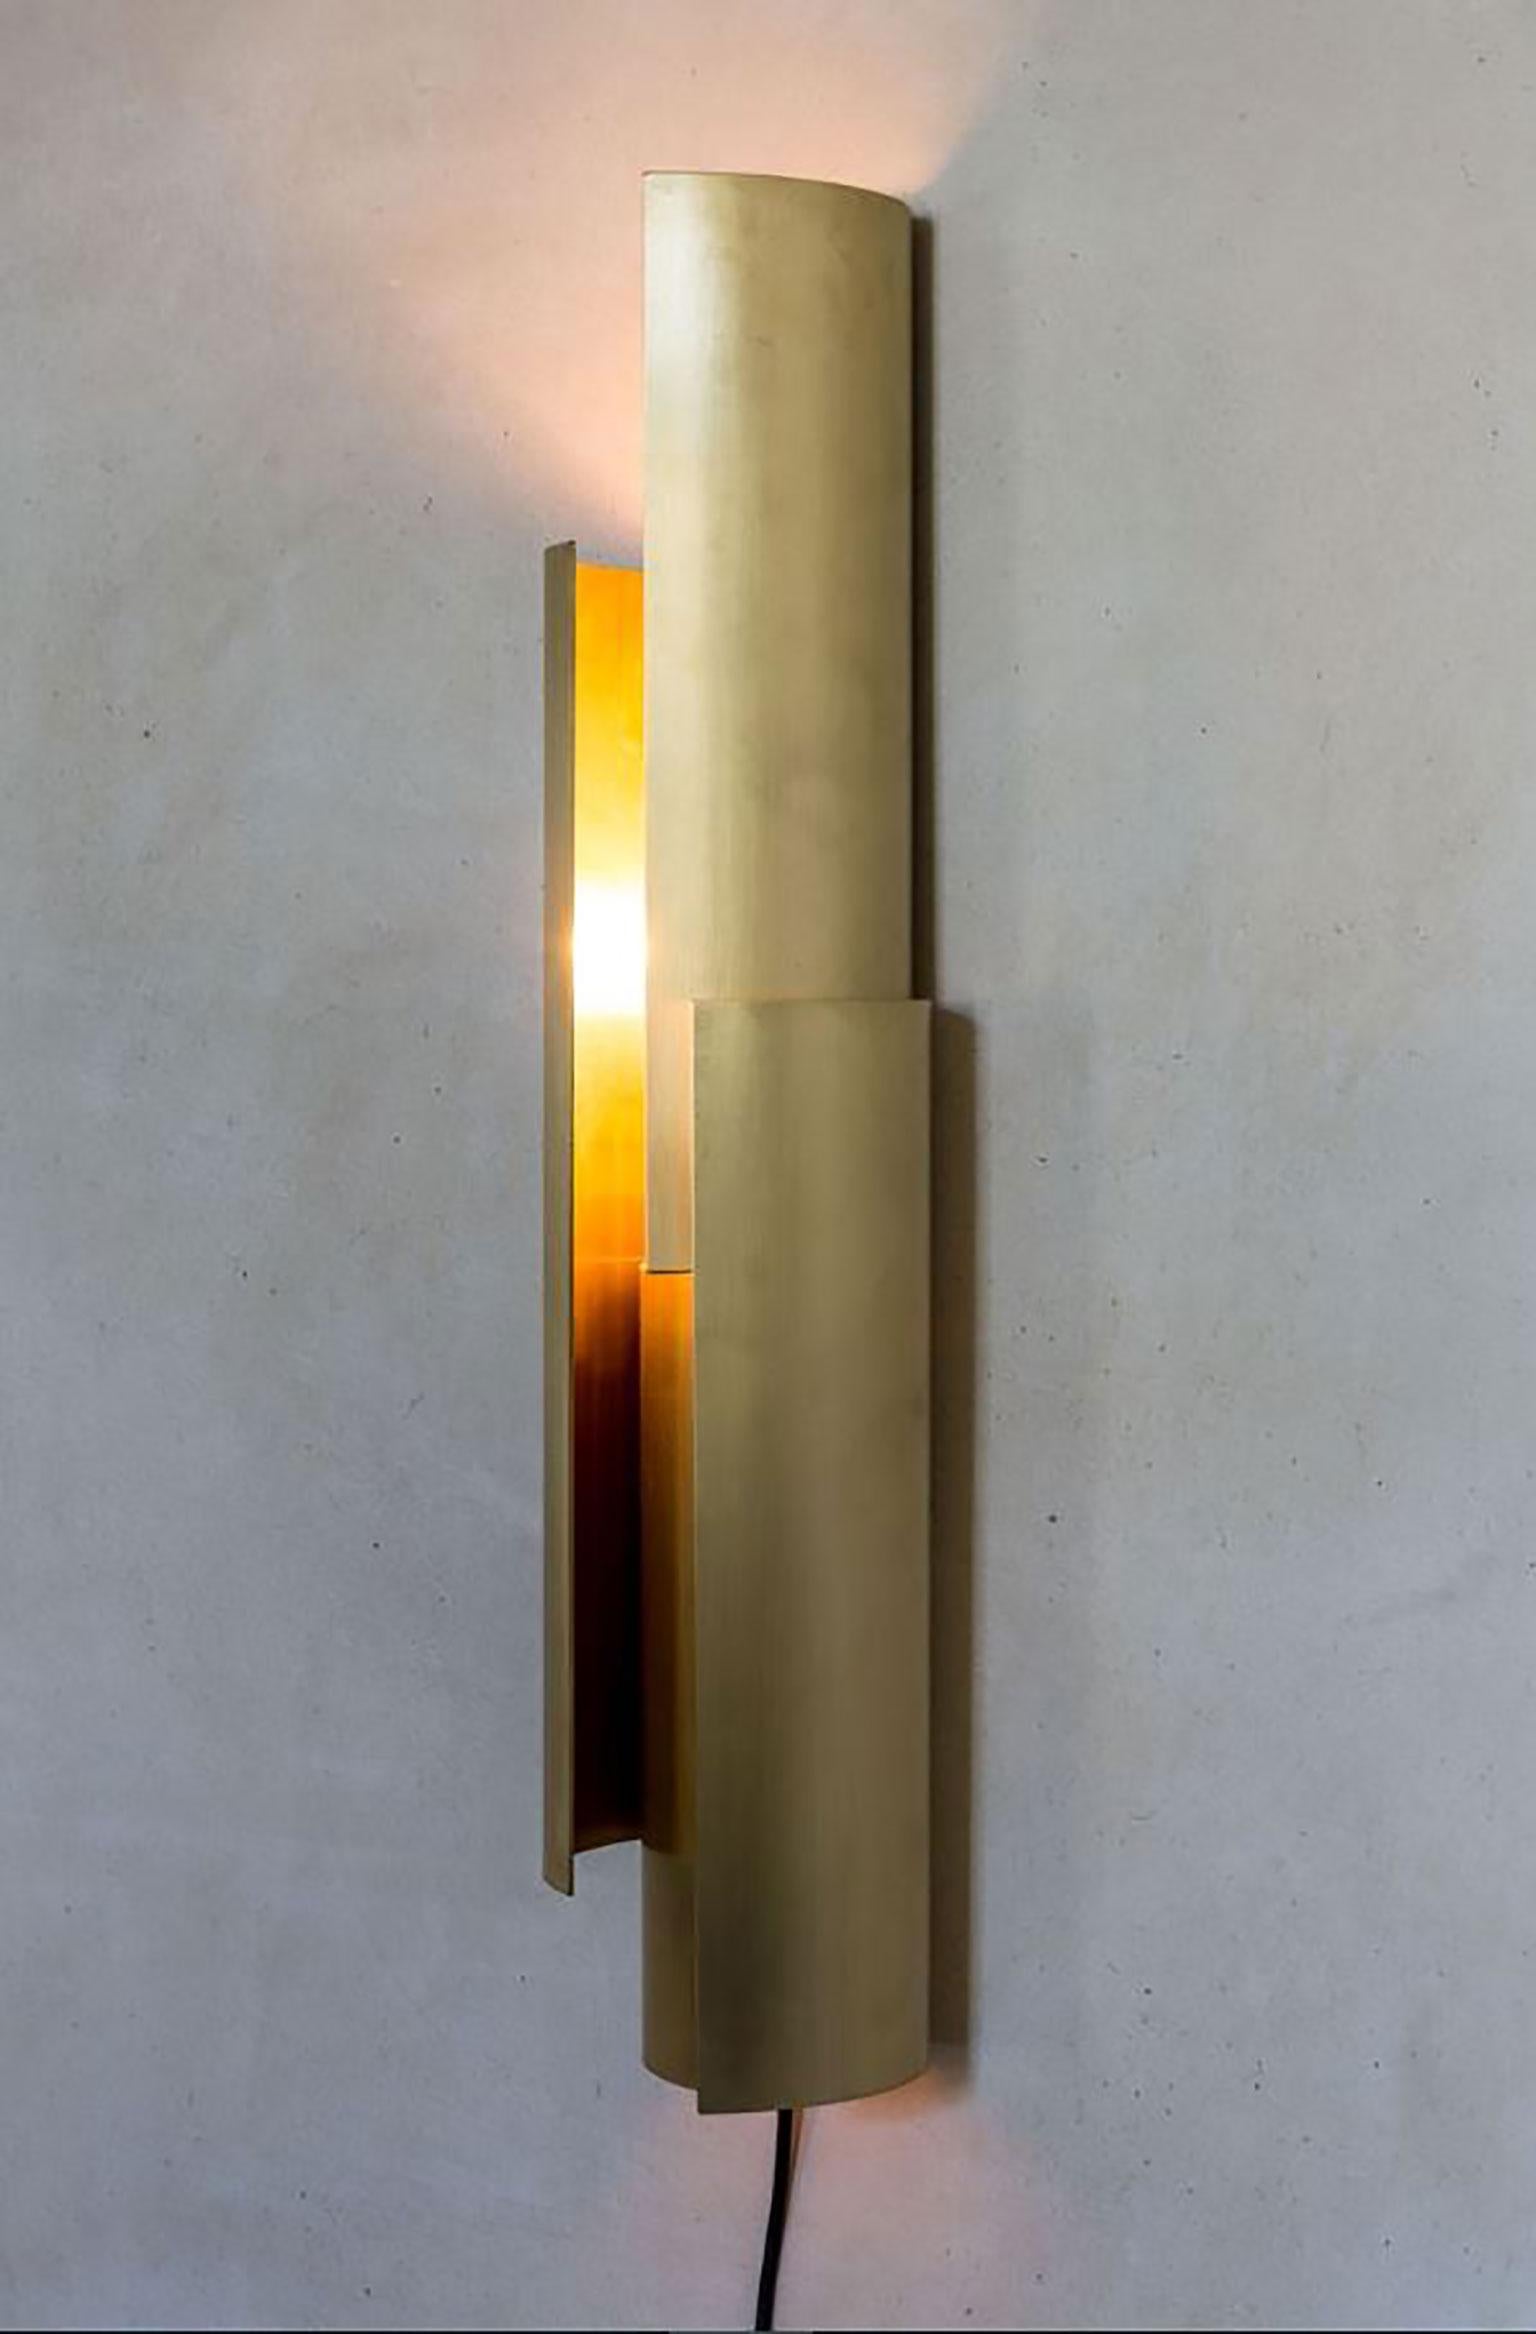 Sfoglia wall lamp by Aldo Parisotto & Massimo Formenton for Mingardo. Sfoglia is a luminescent object produced in black steel or raw brass. The wall light is formed from the amalgamation of metal sheets, calendared or folded. The overlay of the